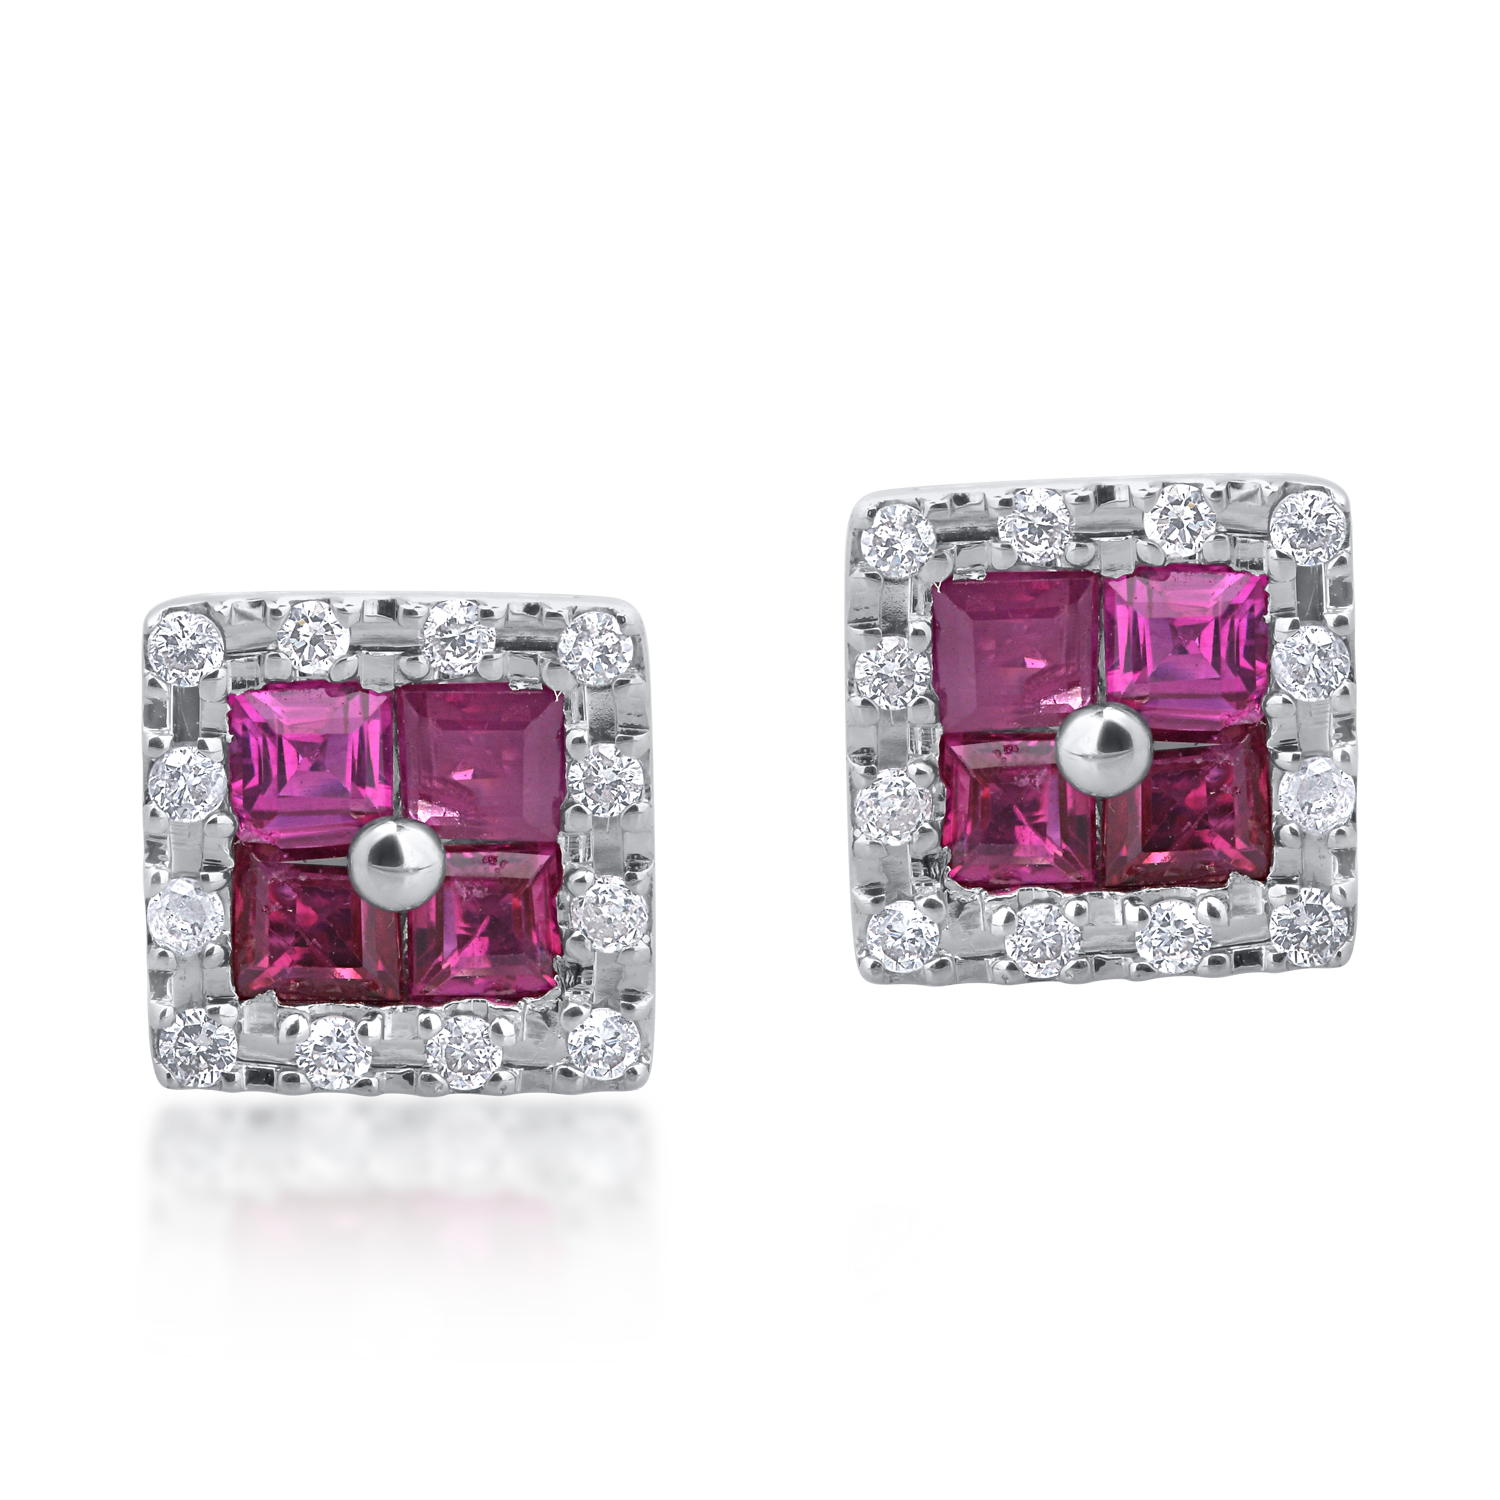 18K white gold earrings with 0.55ct rubies and 0.09ct diamonds